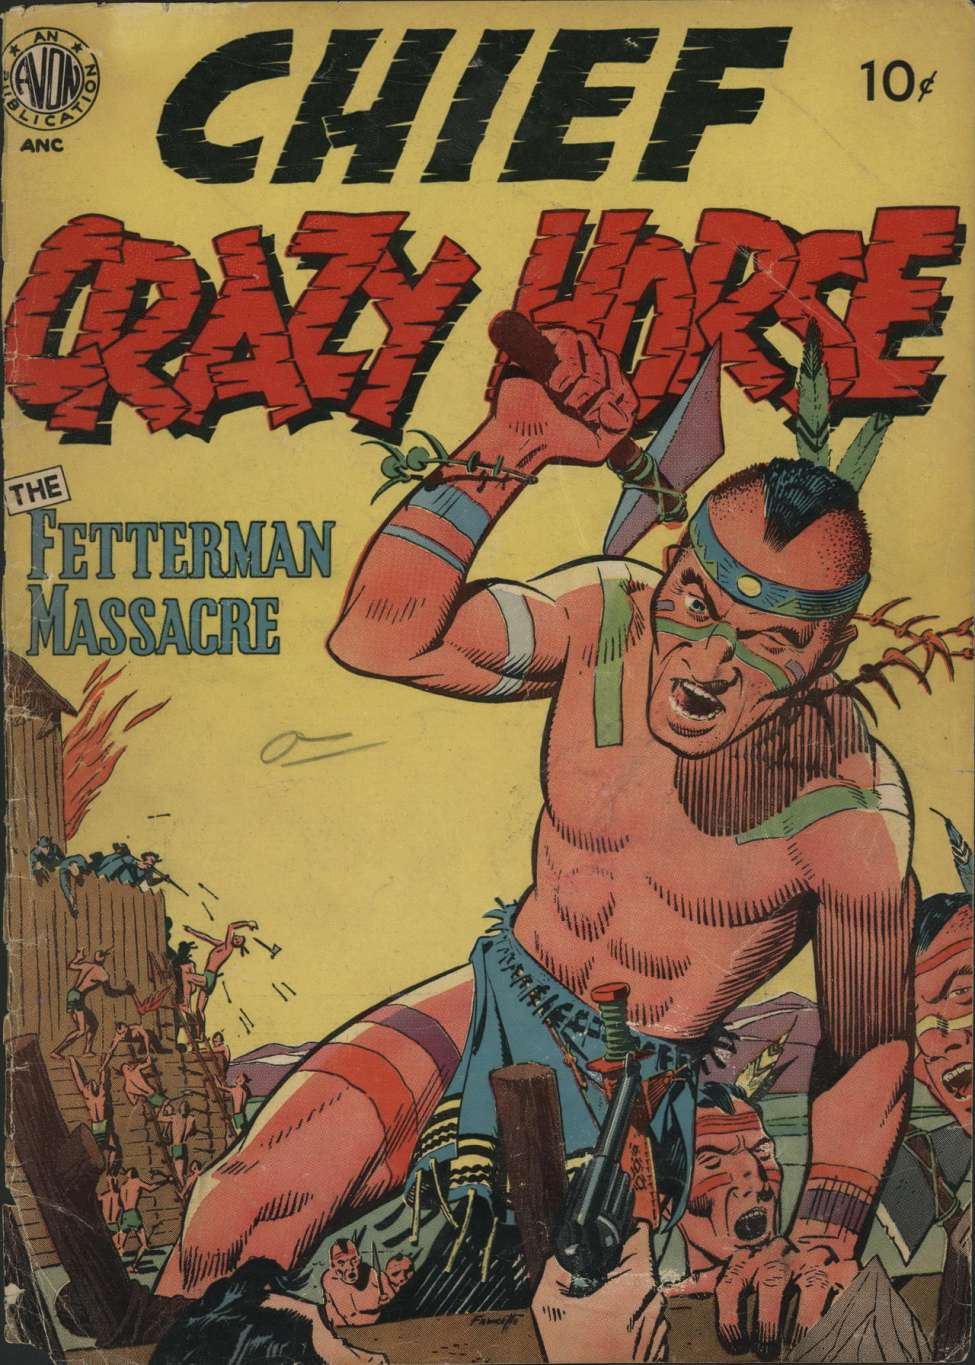 Book Cover For Chief Crazy Horse nn